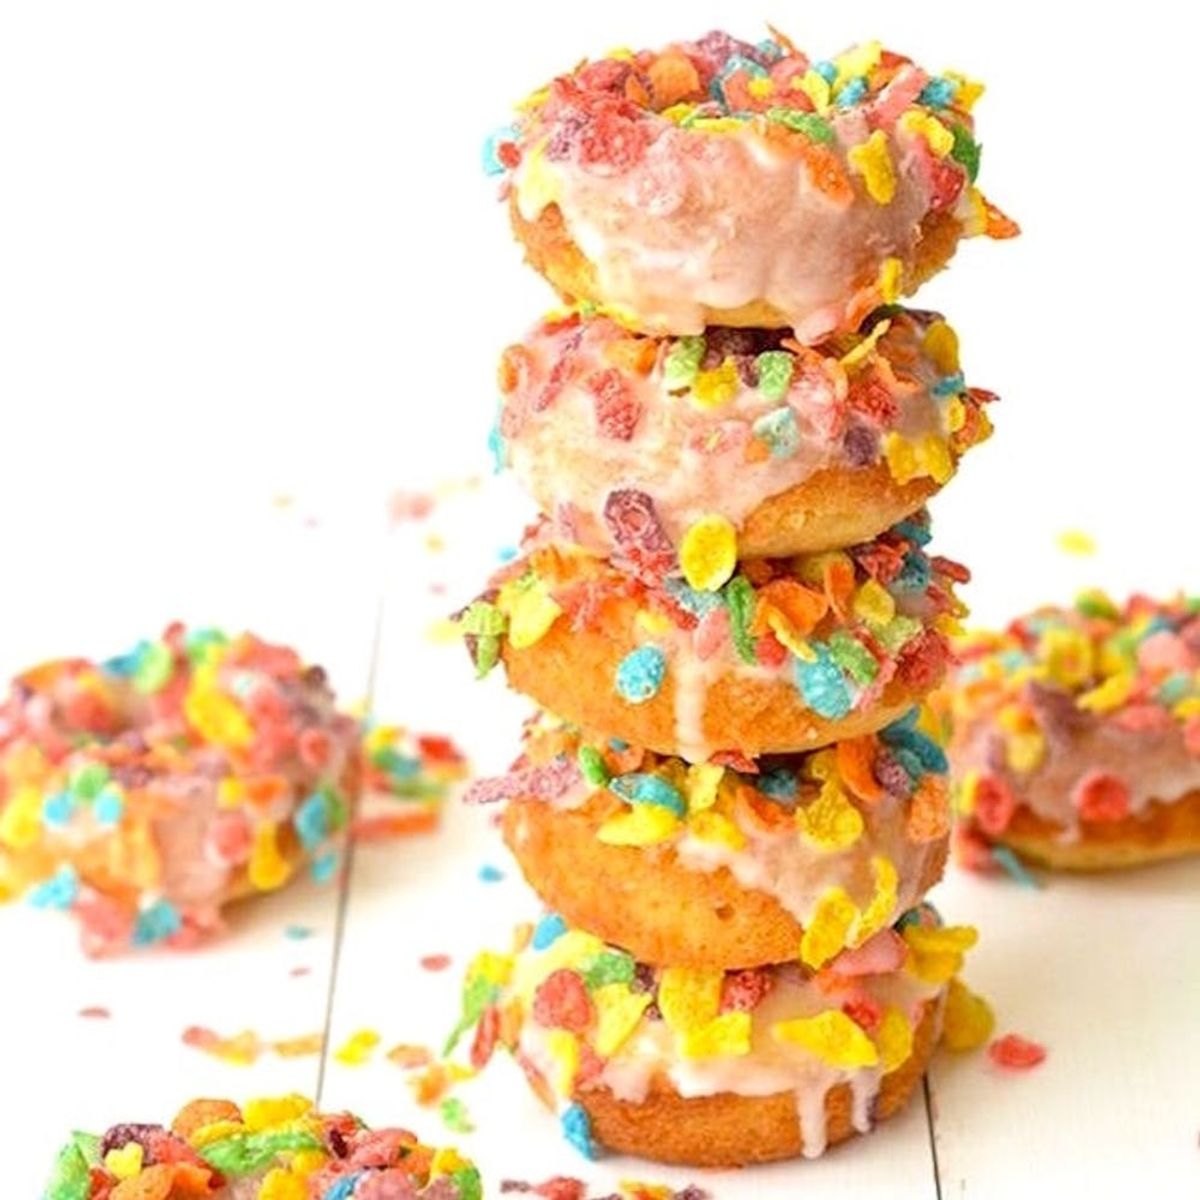 15 Dessert Recipes to Use Up Your Leftover Cereal